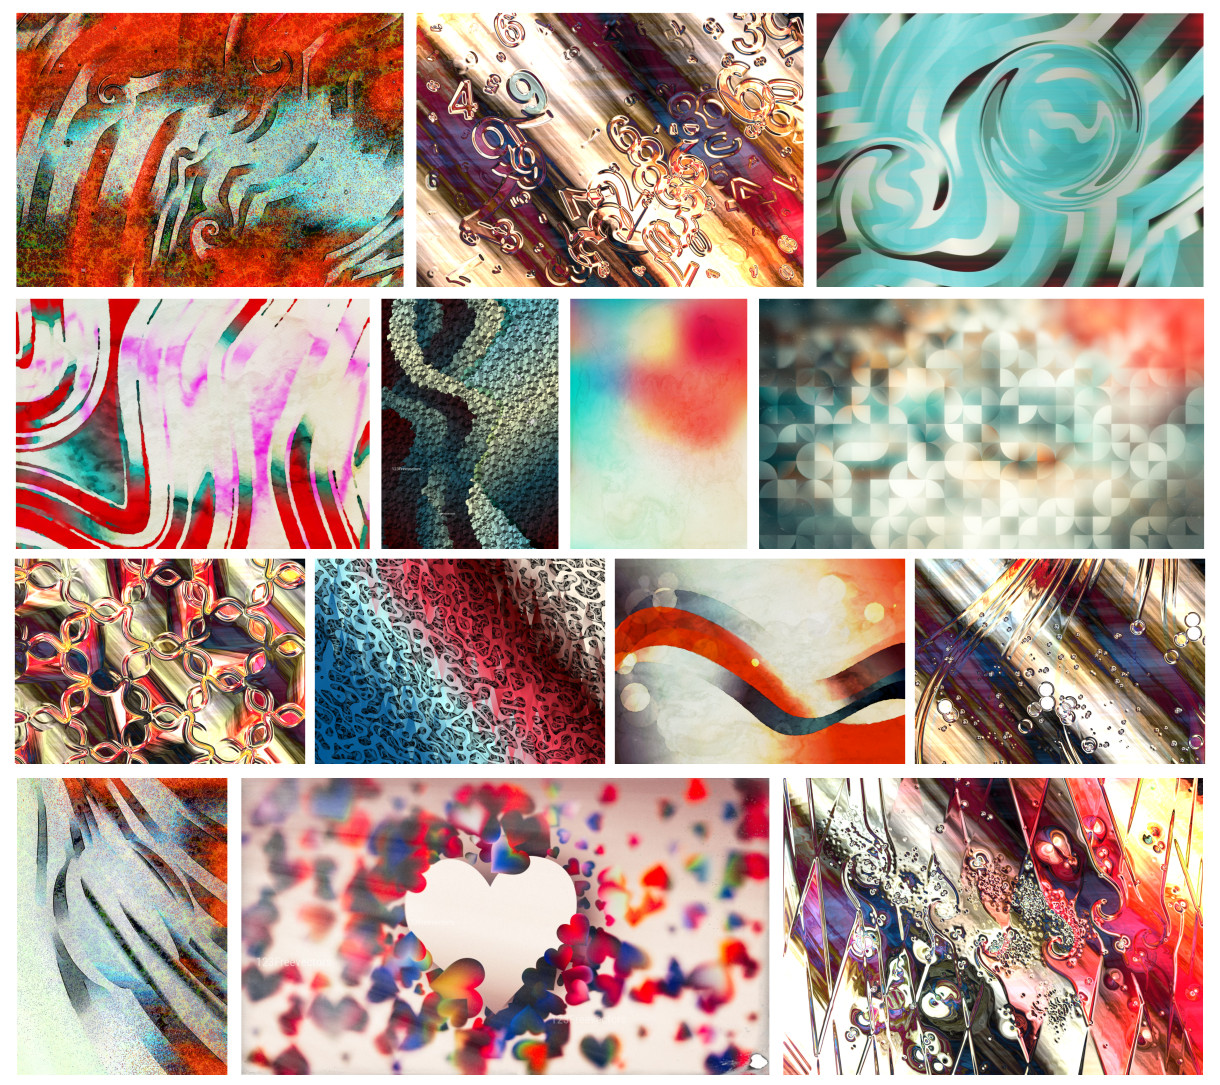 A Creative Collection of Beige Red and Blue Designs: Abstract Backgrounds, Textures, and More